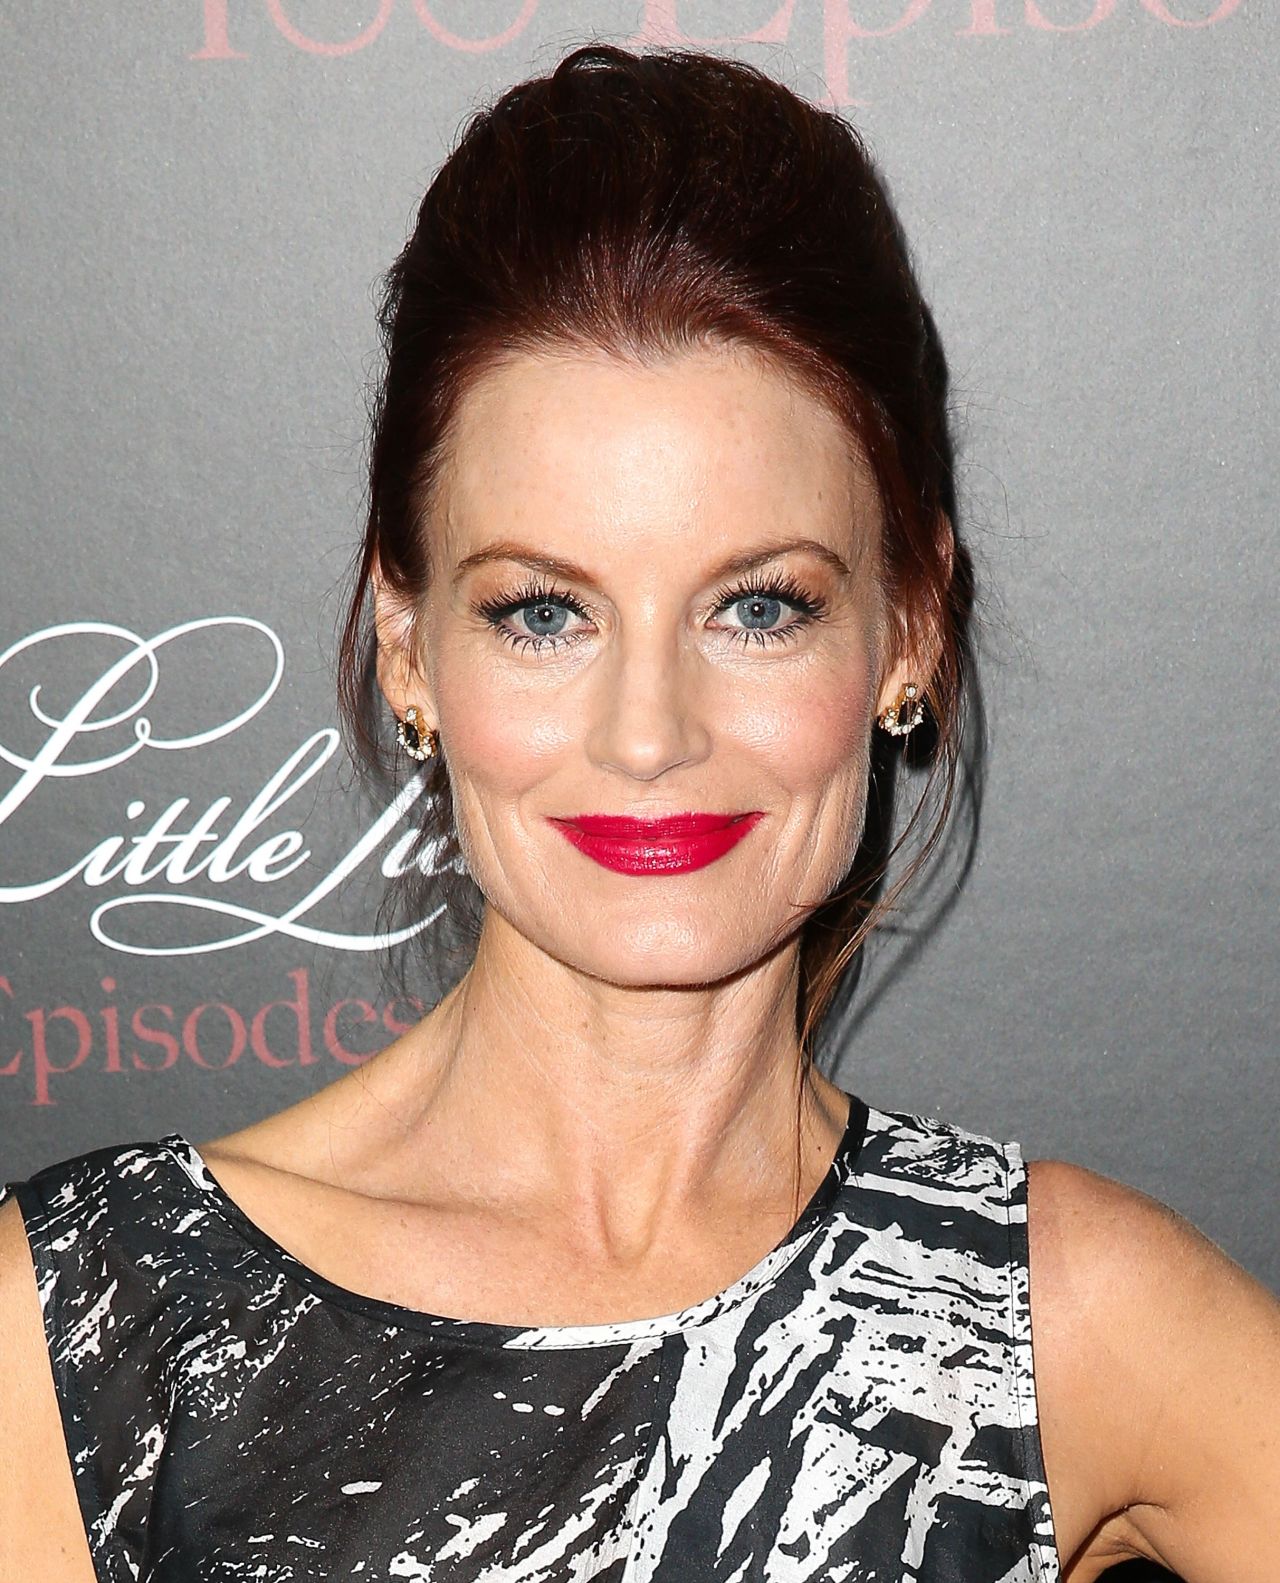 Laura Leighton - ‘Pretty Little Liars’ 100th Episode Celebration in Hollywood